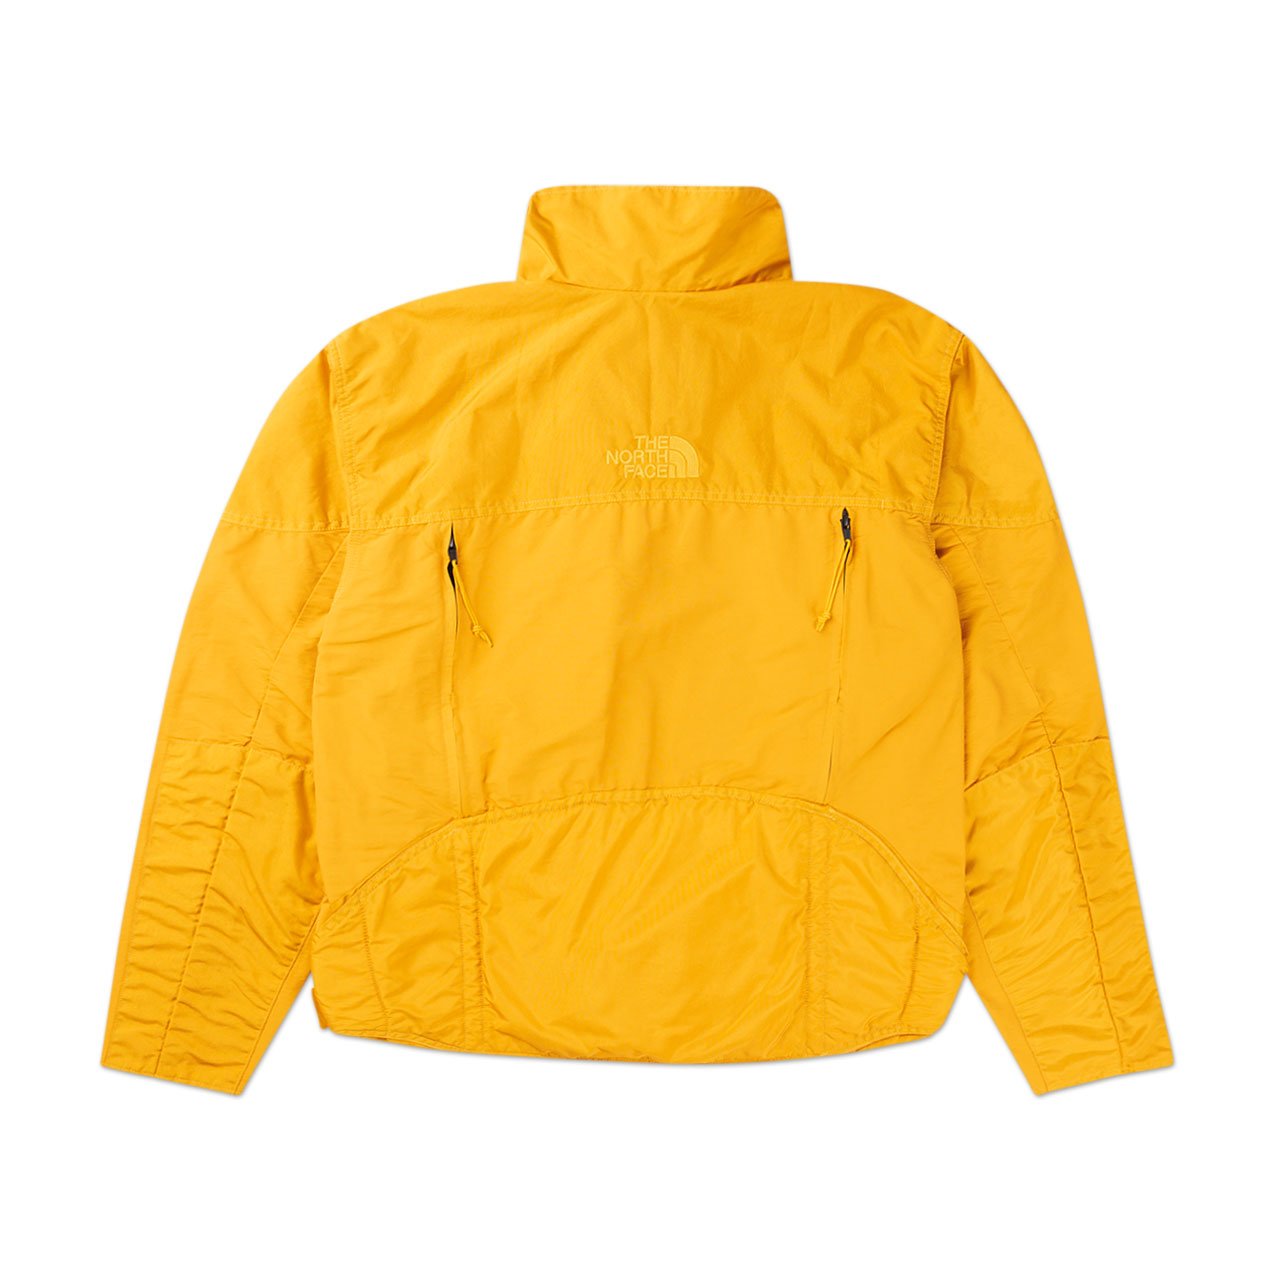 Exclusive to size?TV - The size? x The North Face Steep Tech